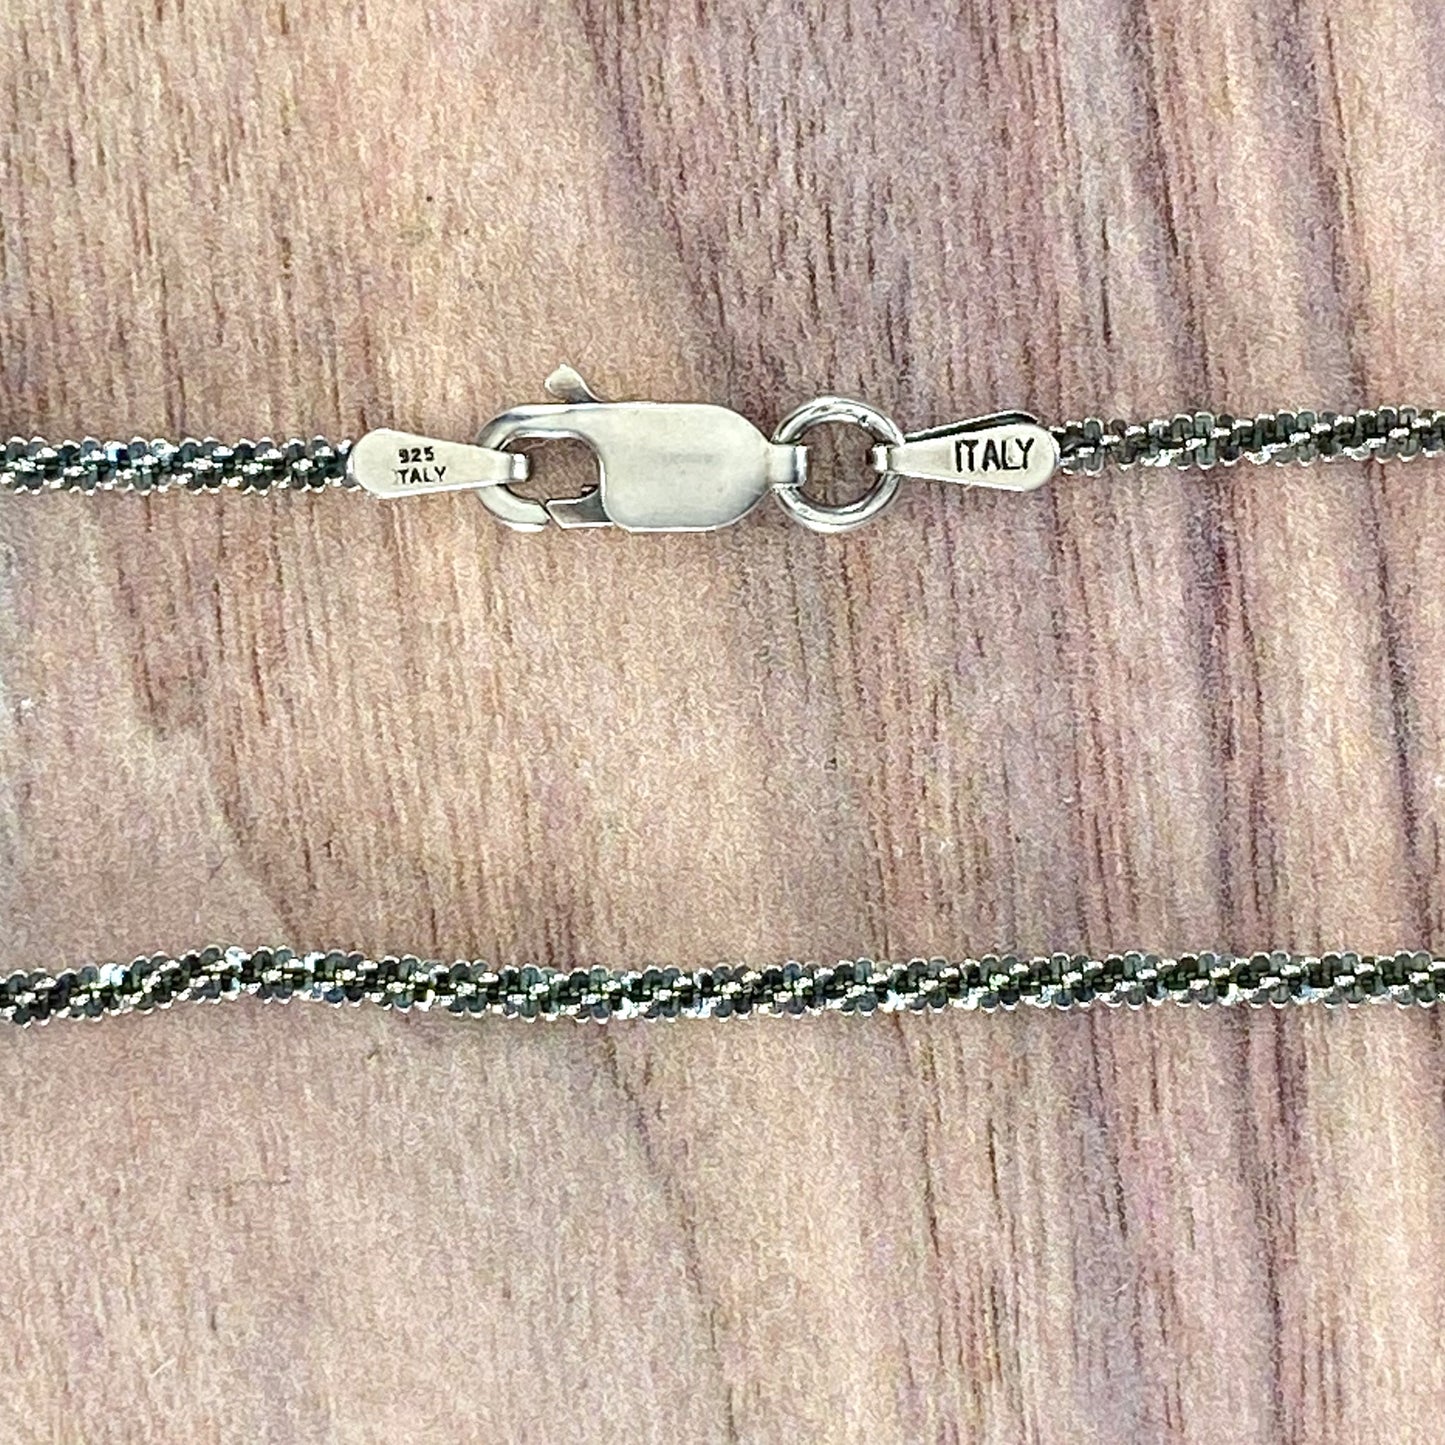 Oxidized Sterling Silver Criss Cross Chain - Stone Treasures by the Lake